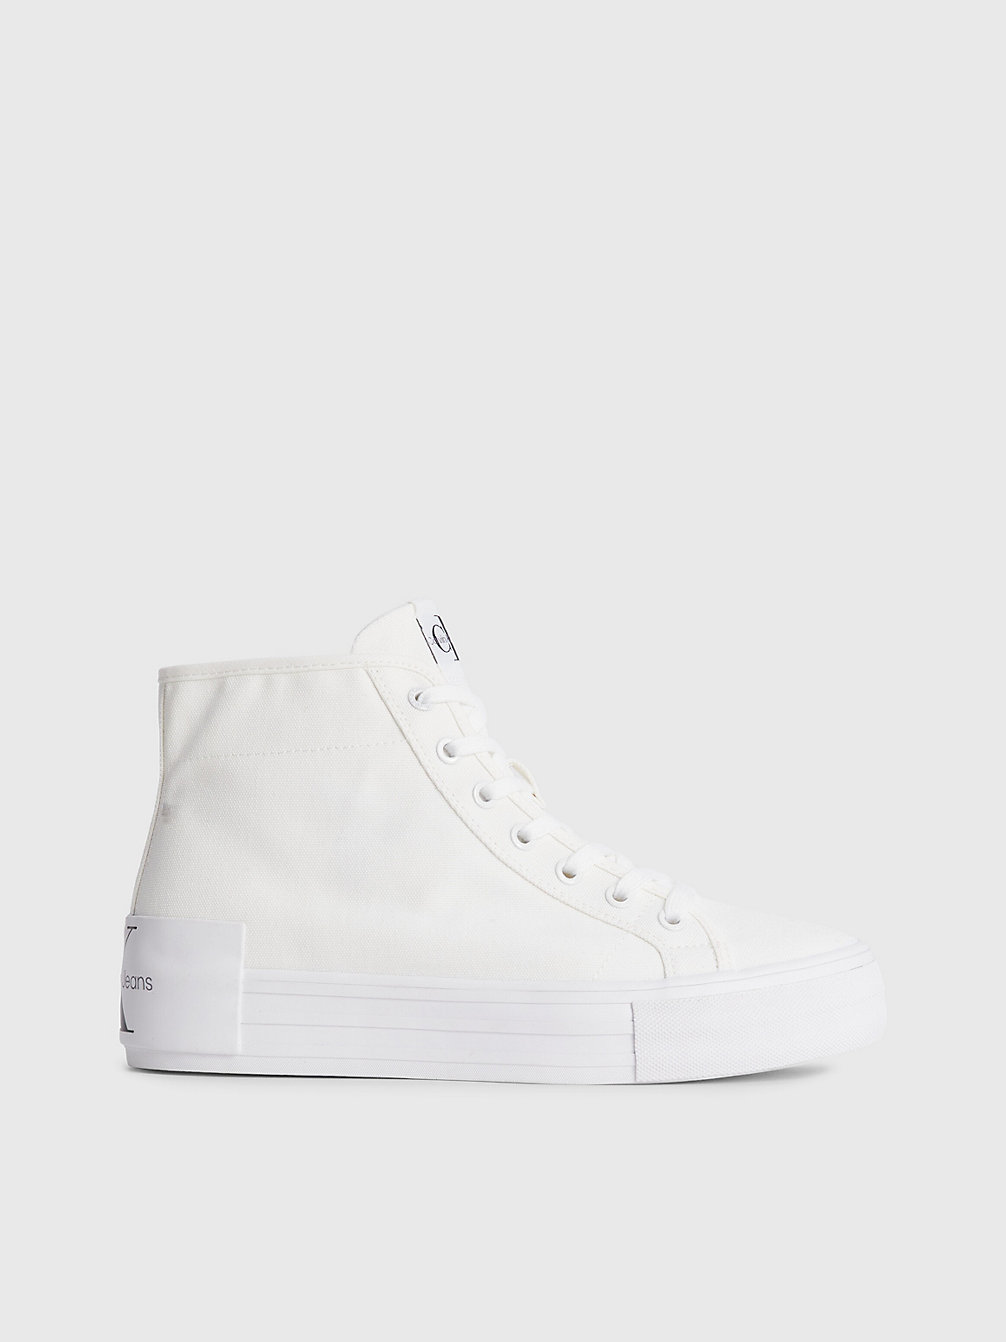 WHITE Recycled High-Top Platform Trainers undefined women Calvin Klein